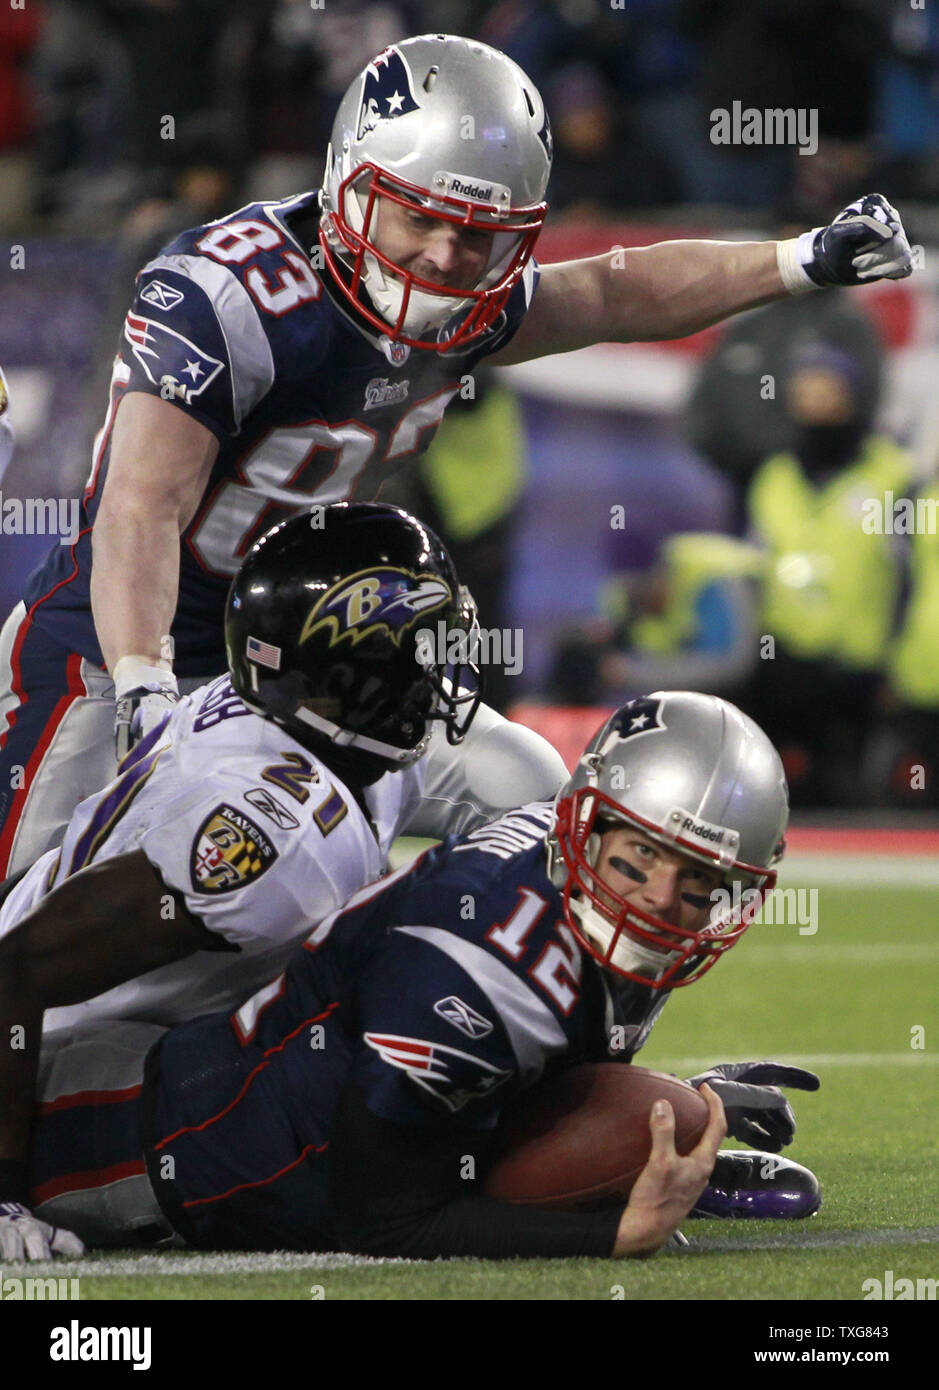 New England Patriots quarterback Tom Brady (12) looks up after being stopped by Baltimore Ravens cornerback Lardarius Webb (21) as Patriots Wes Welker pumps his fist (83) on a small gain on a quarterback sneak in the AFC Championship game at Gillette Stadium in Foxboro, Massachusetts on January 22, 2012.  The Patriots defeated the Ravens 23-20.  UPI/Matthew Healey Stock Photo